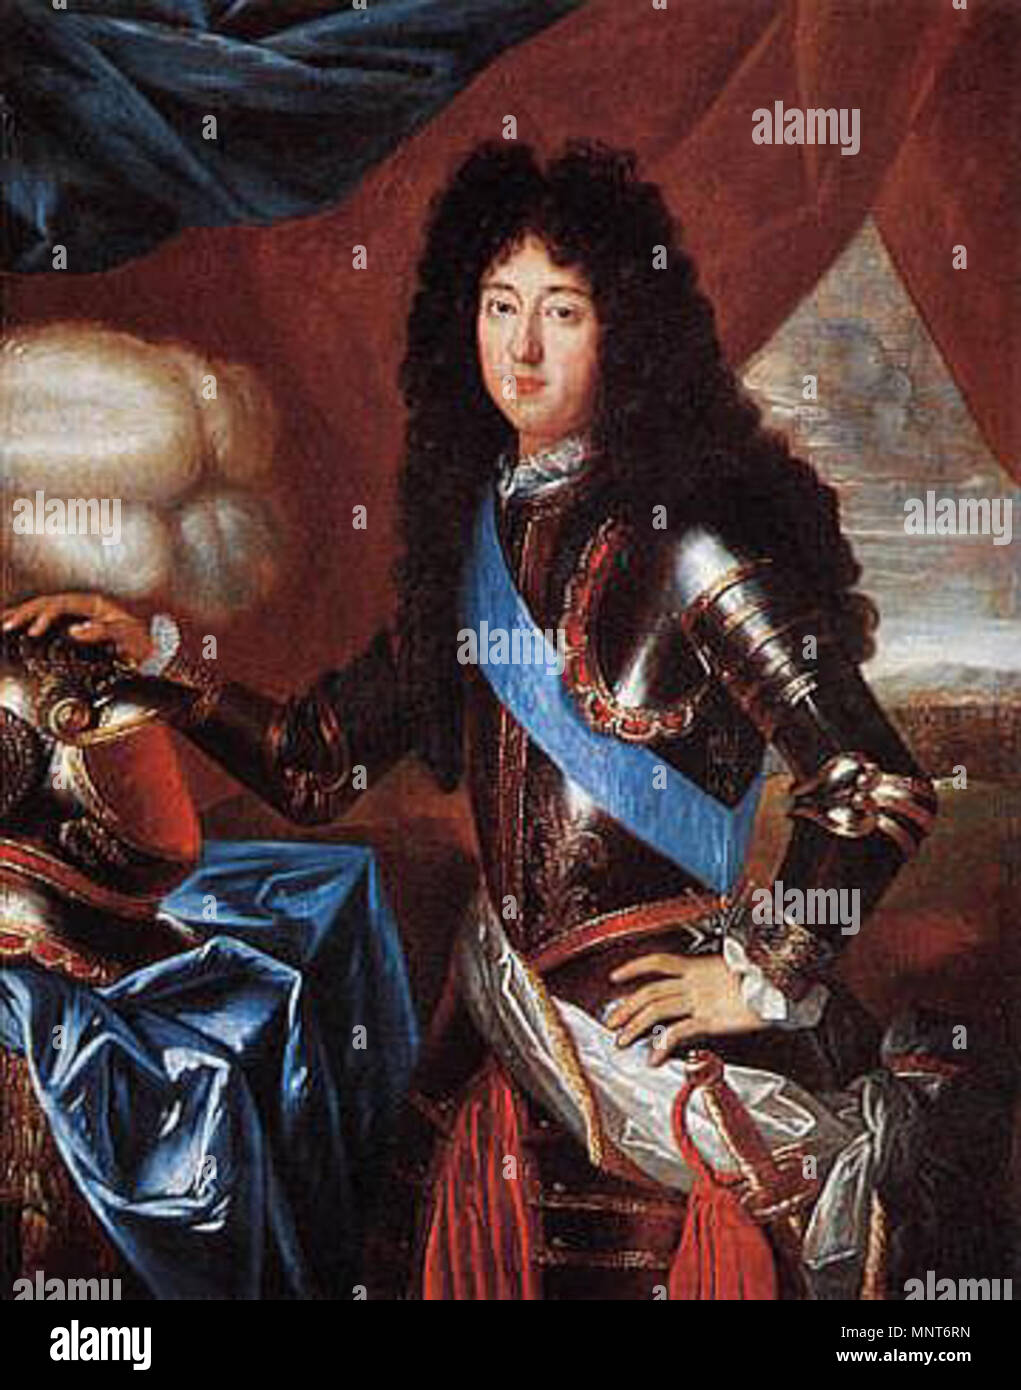 Philippe I, Duke of Orléans (1640-1701), brother of Louis XIV, wearing an armor with fleur-de ...